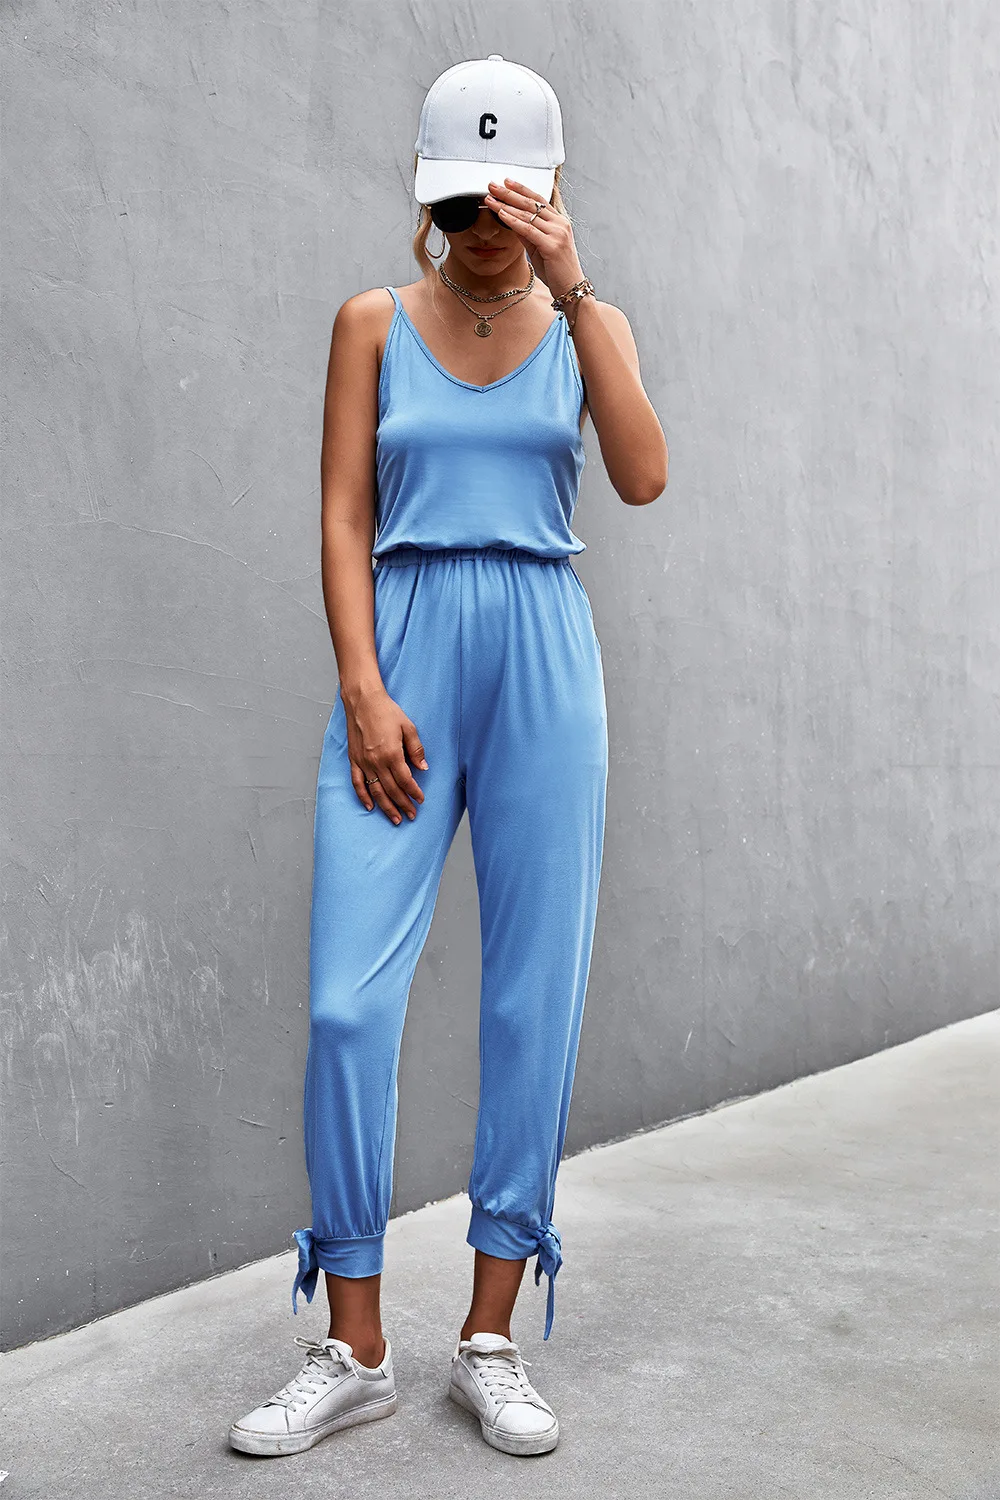 

Missuoo 2023 Summer New Solid Color V-Neck Elastic High Waisted Sling Jumpsuits For Women Daily Going Out Casual Jump Suits